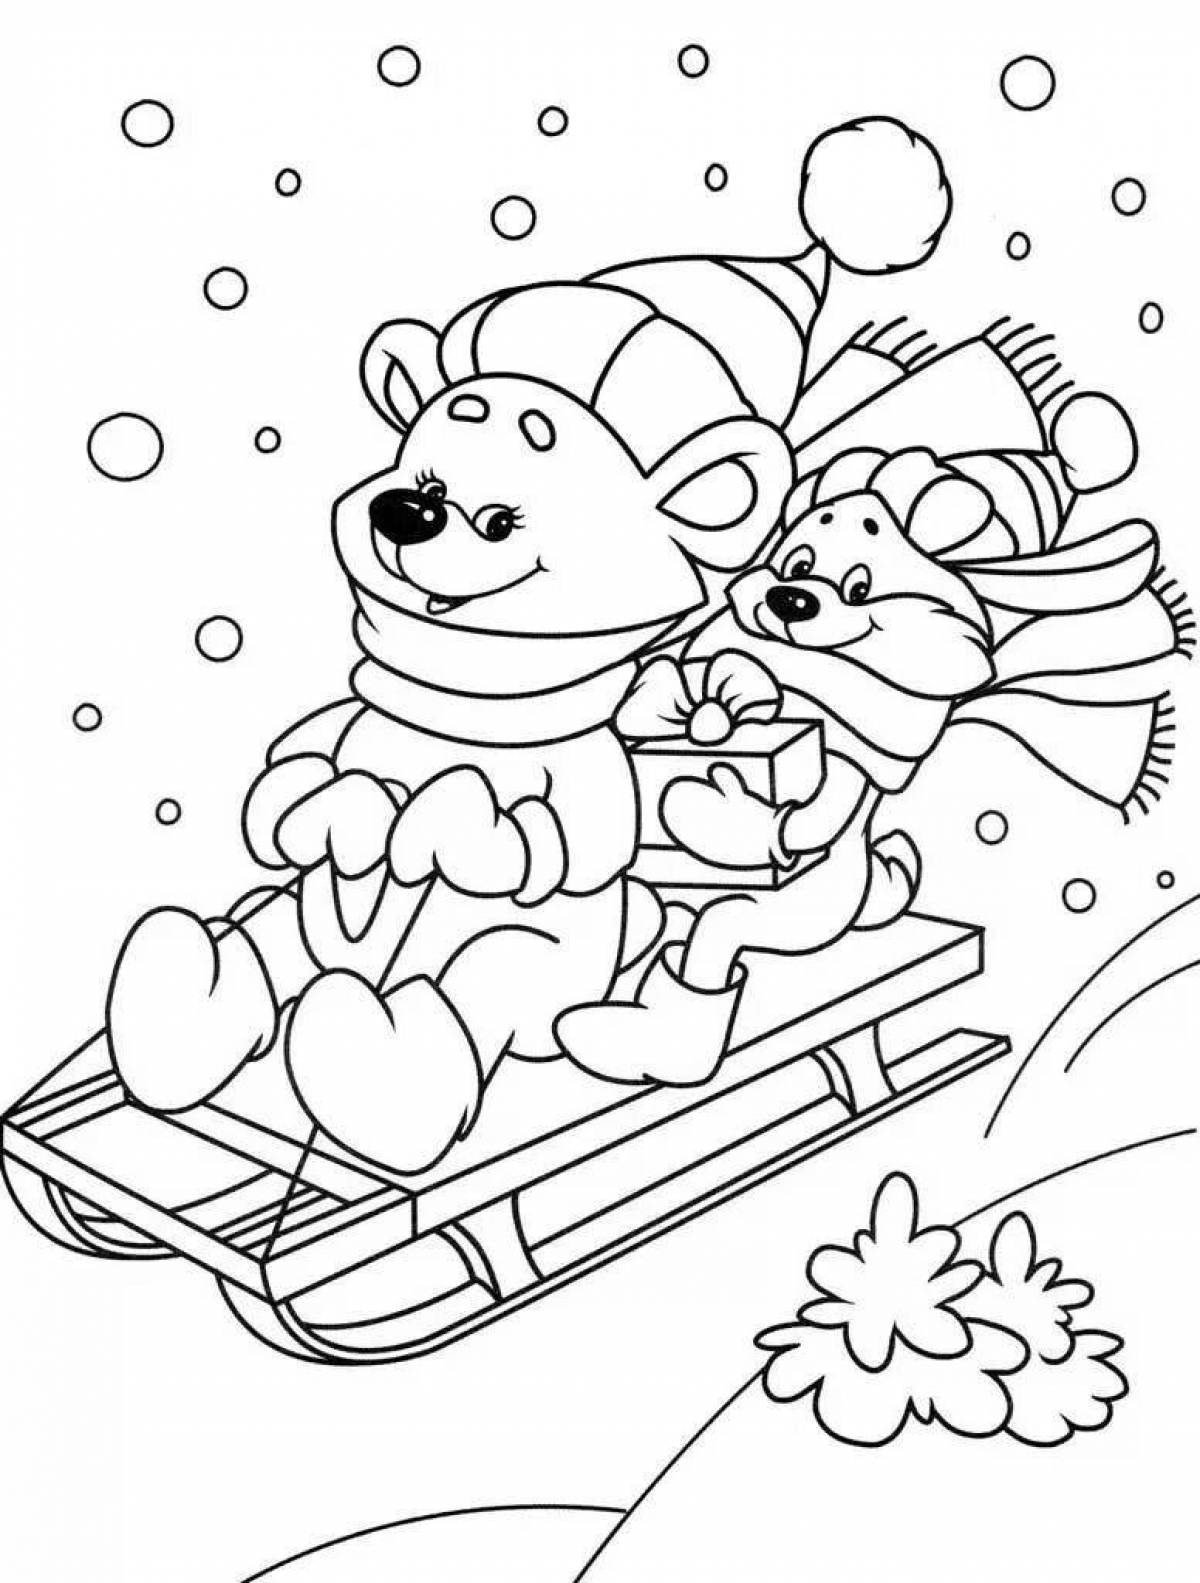 Fabulous winter coloring pages for 3 year olds